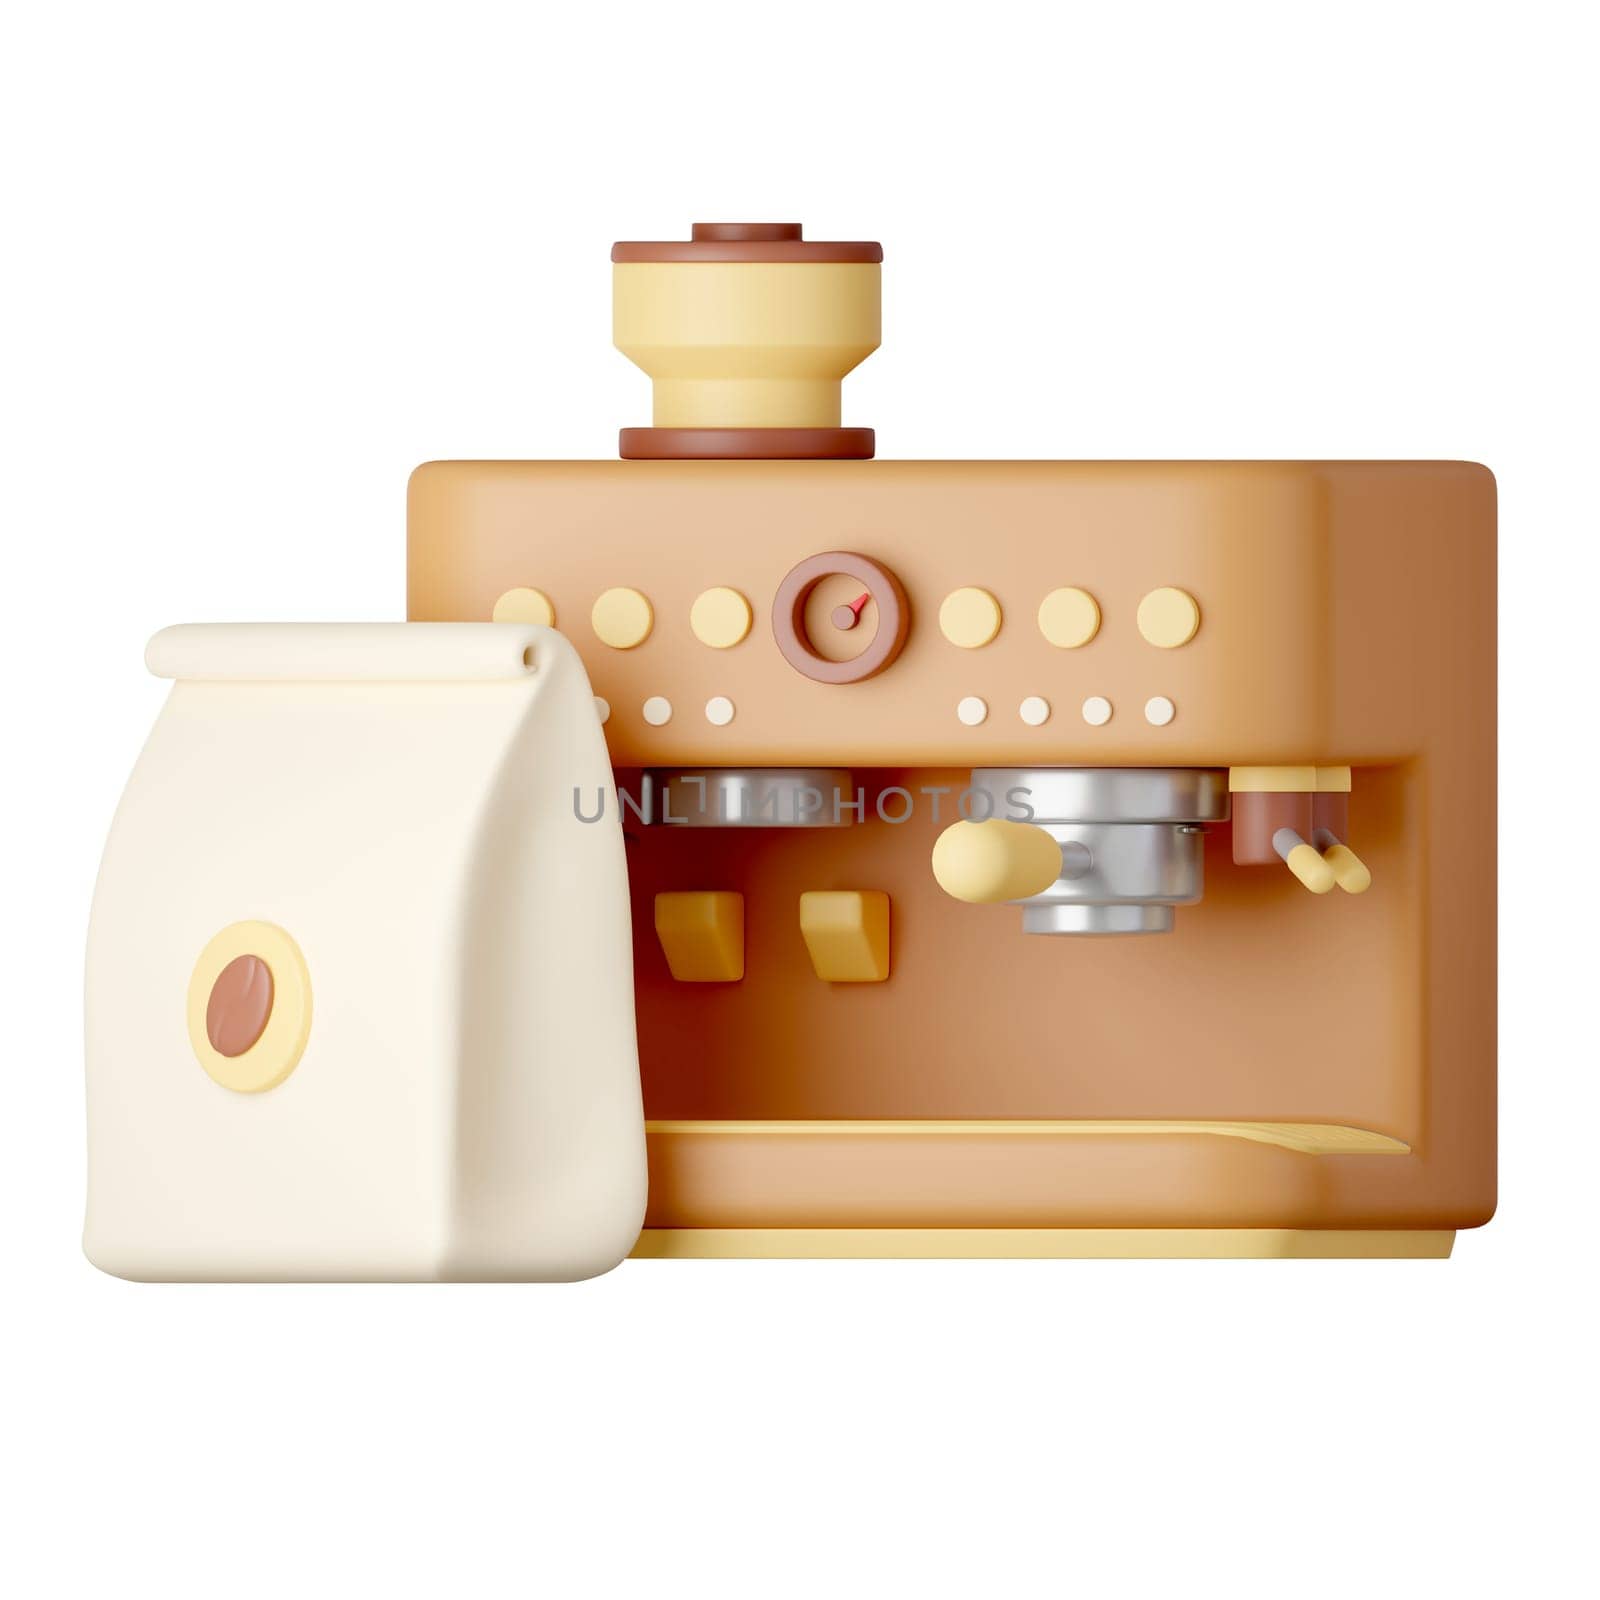 Coffee bean and coffee machine Cartoon Style Isolated on a White Background. 3d illustration by meepiangraphic